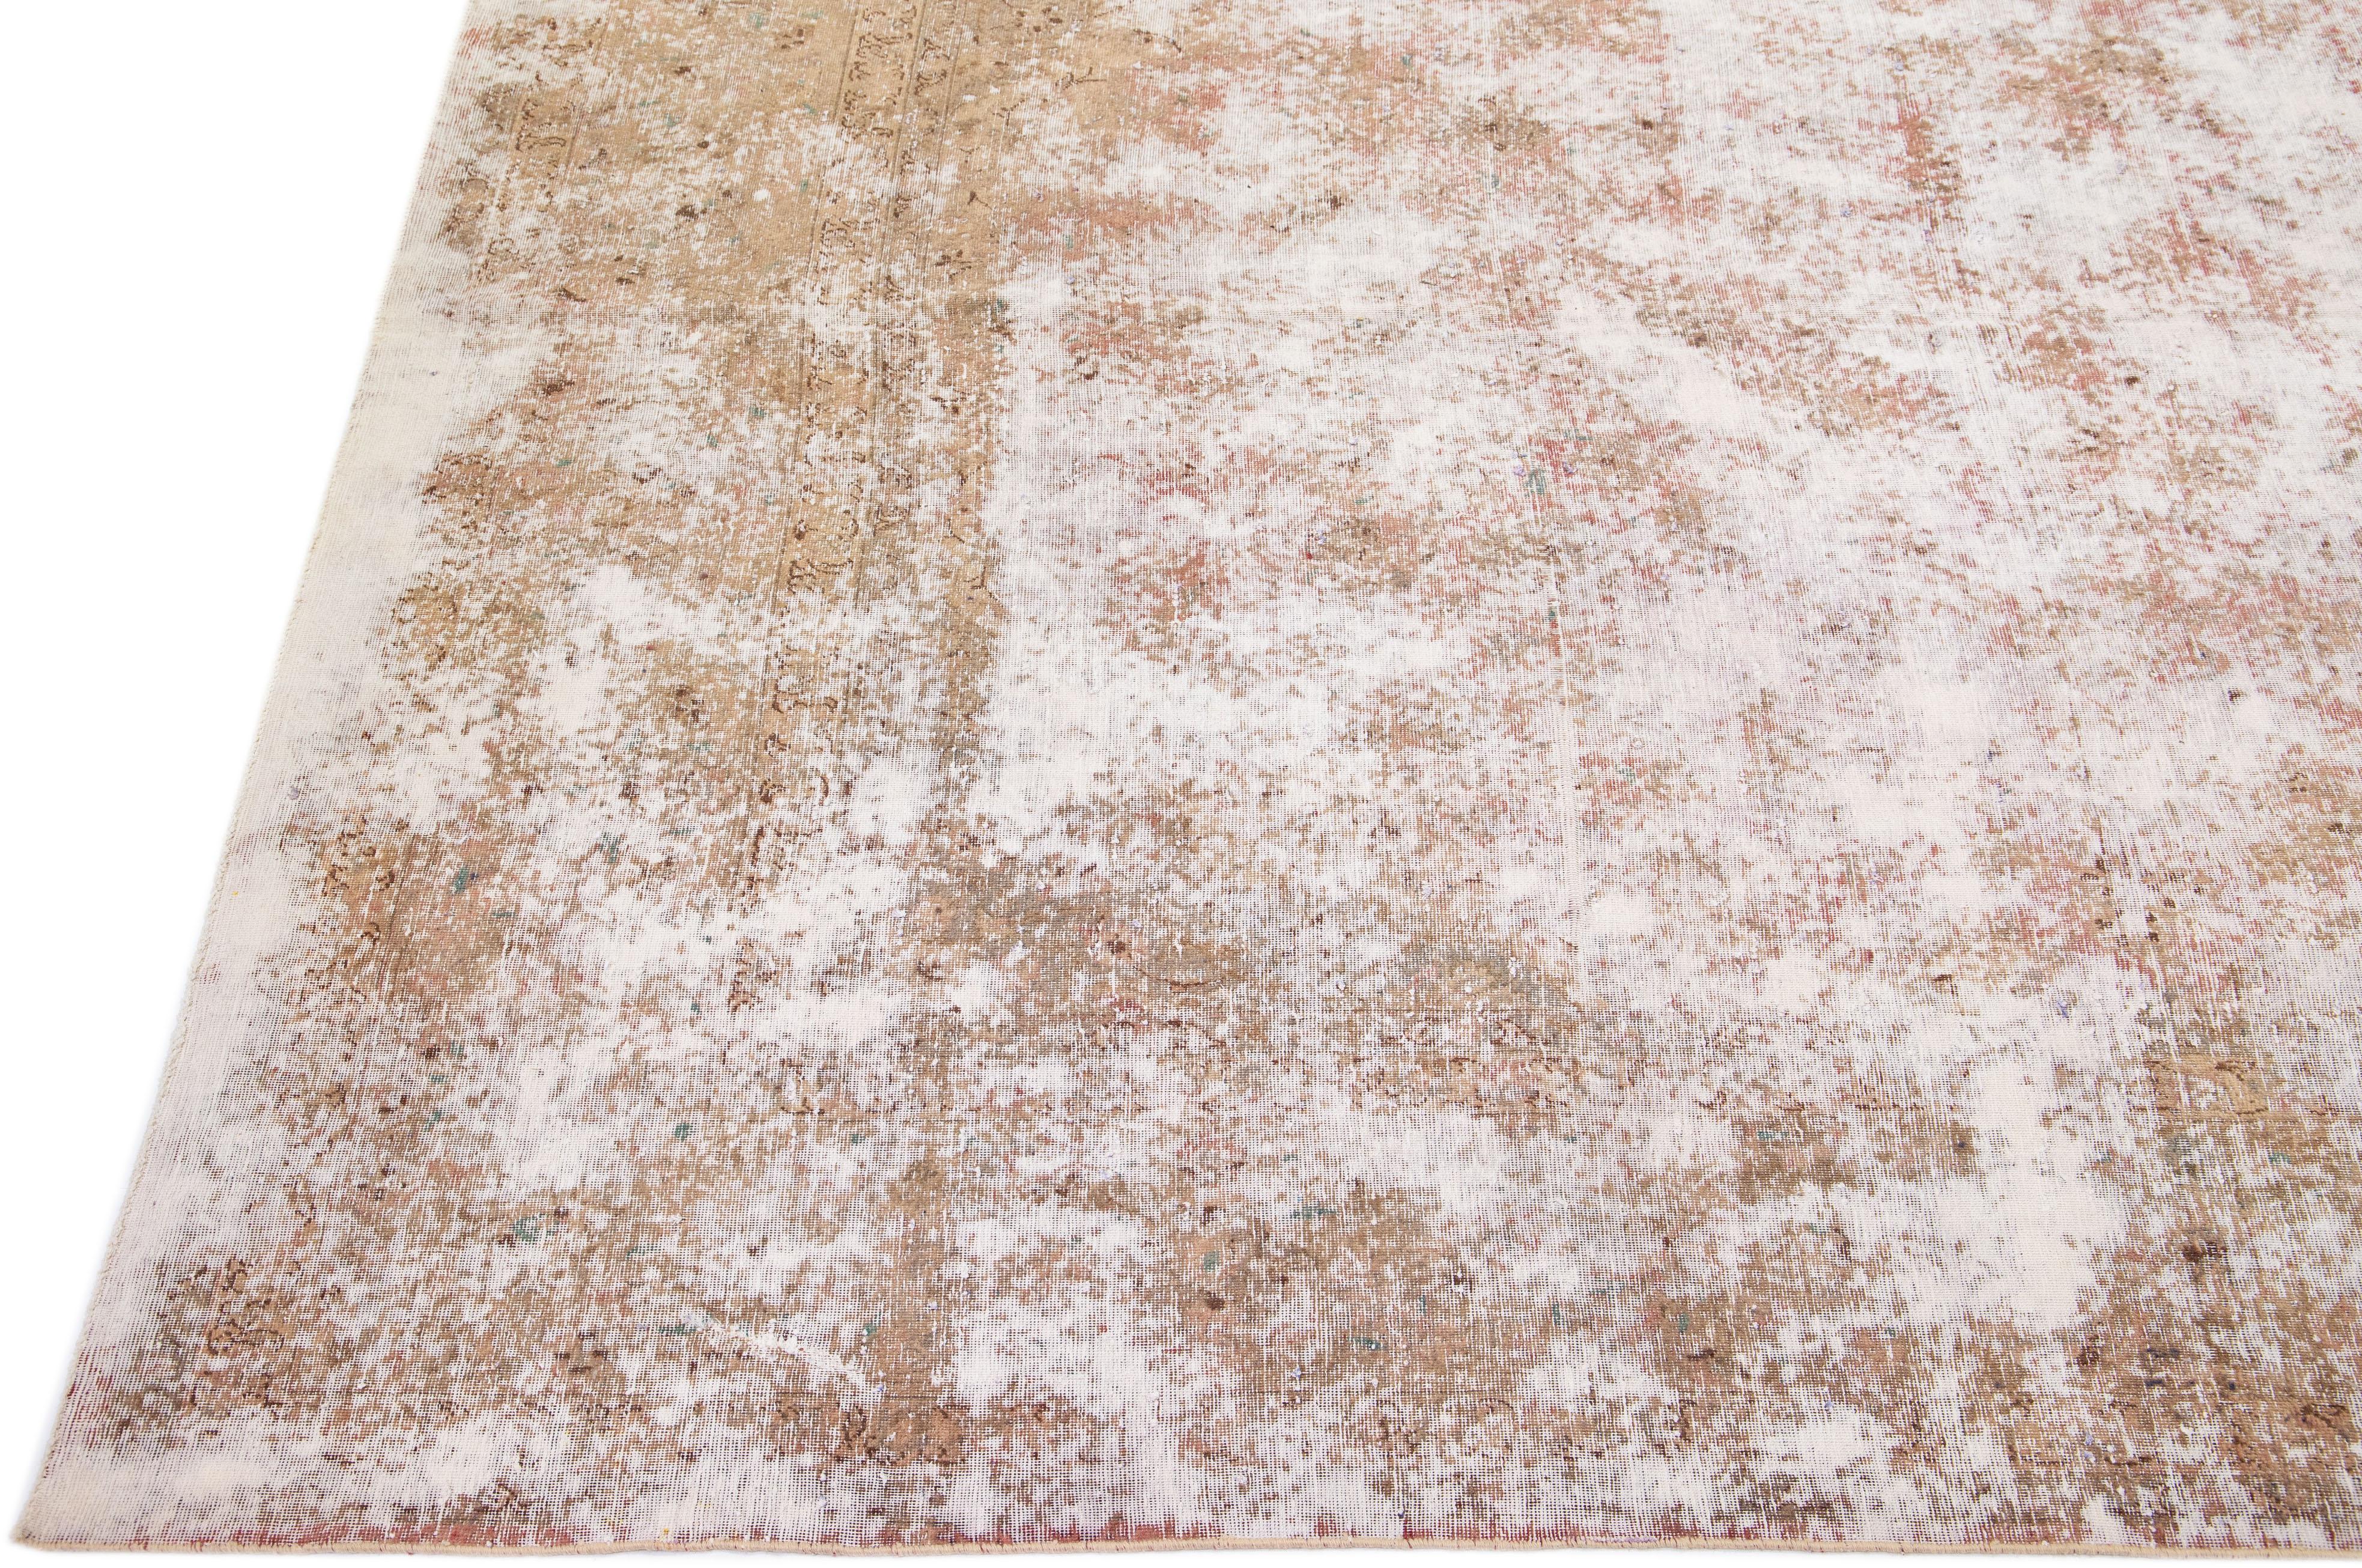 Antique Tabriz Handmade Rust Distressed Persian Wool Rug In Distressed Condition For Sale In Norwalk, CT